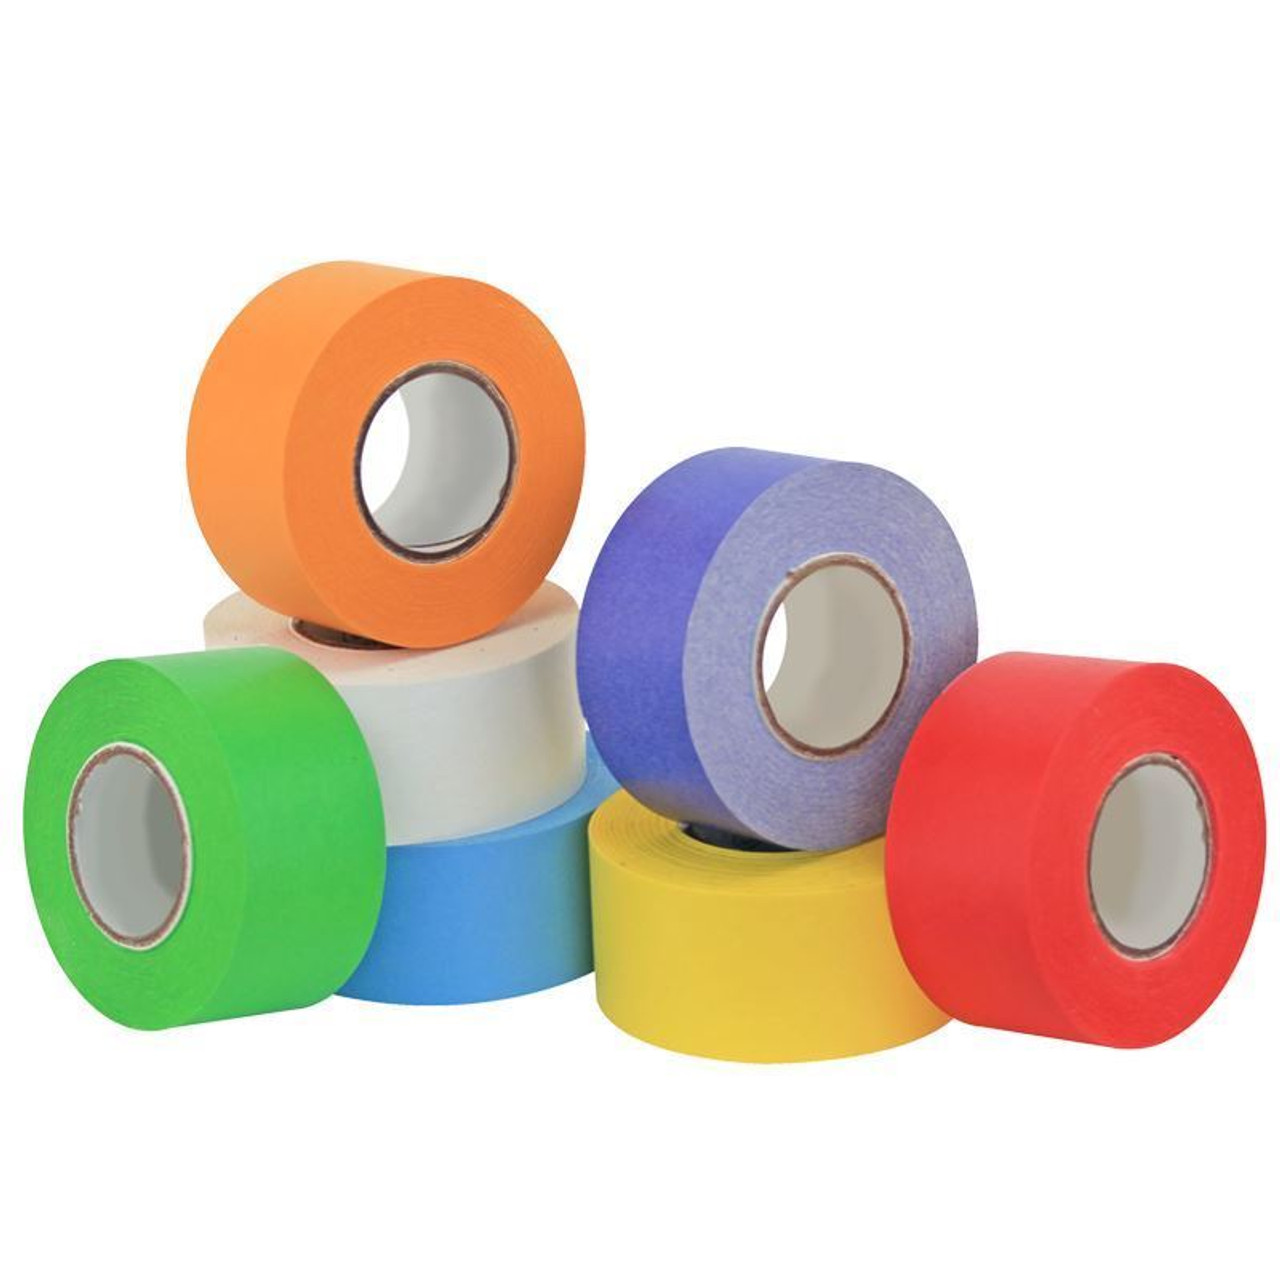 3/4 Labeling Tape Rainbow Pack, 2 Rolls of Each Color: White, Yellow,  Green, Red, Orange